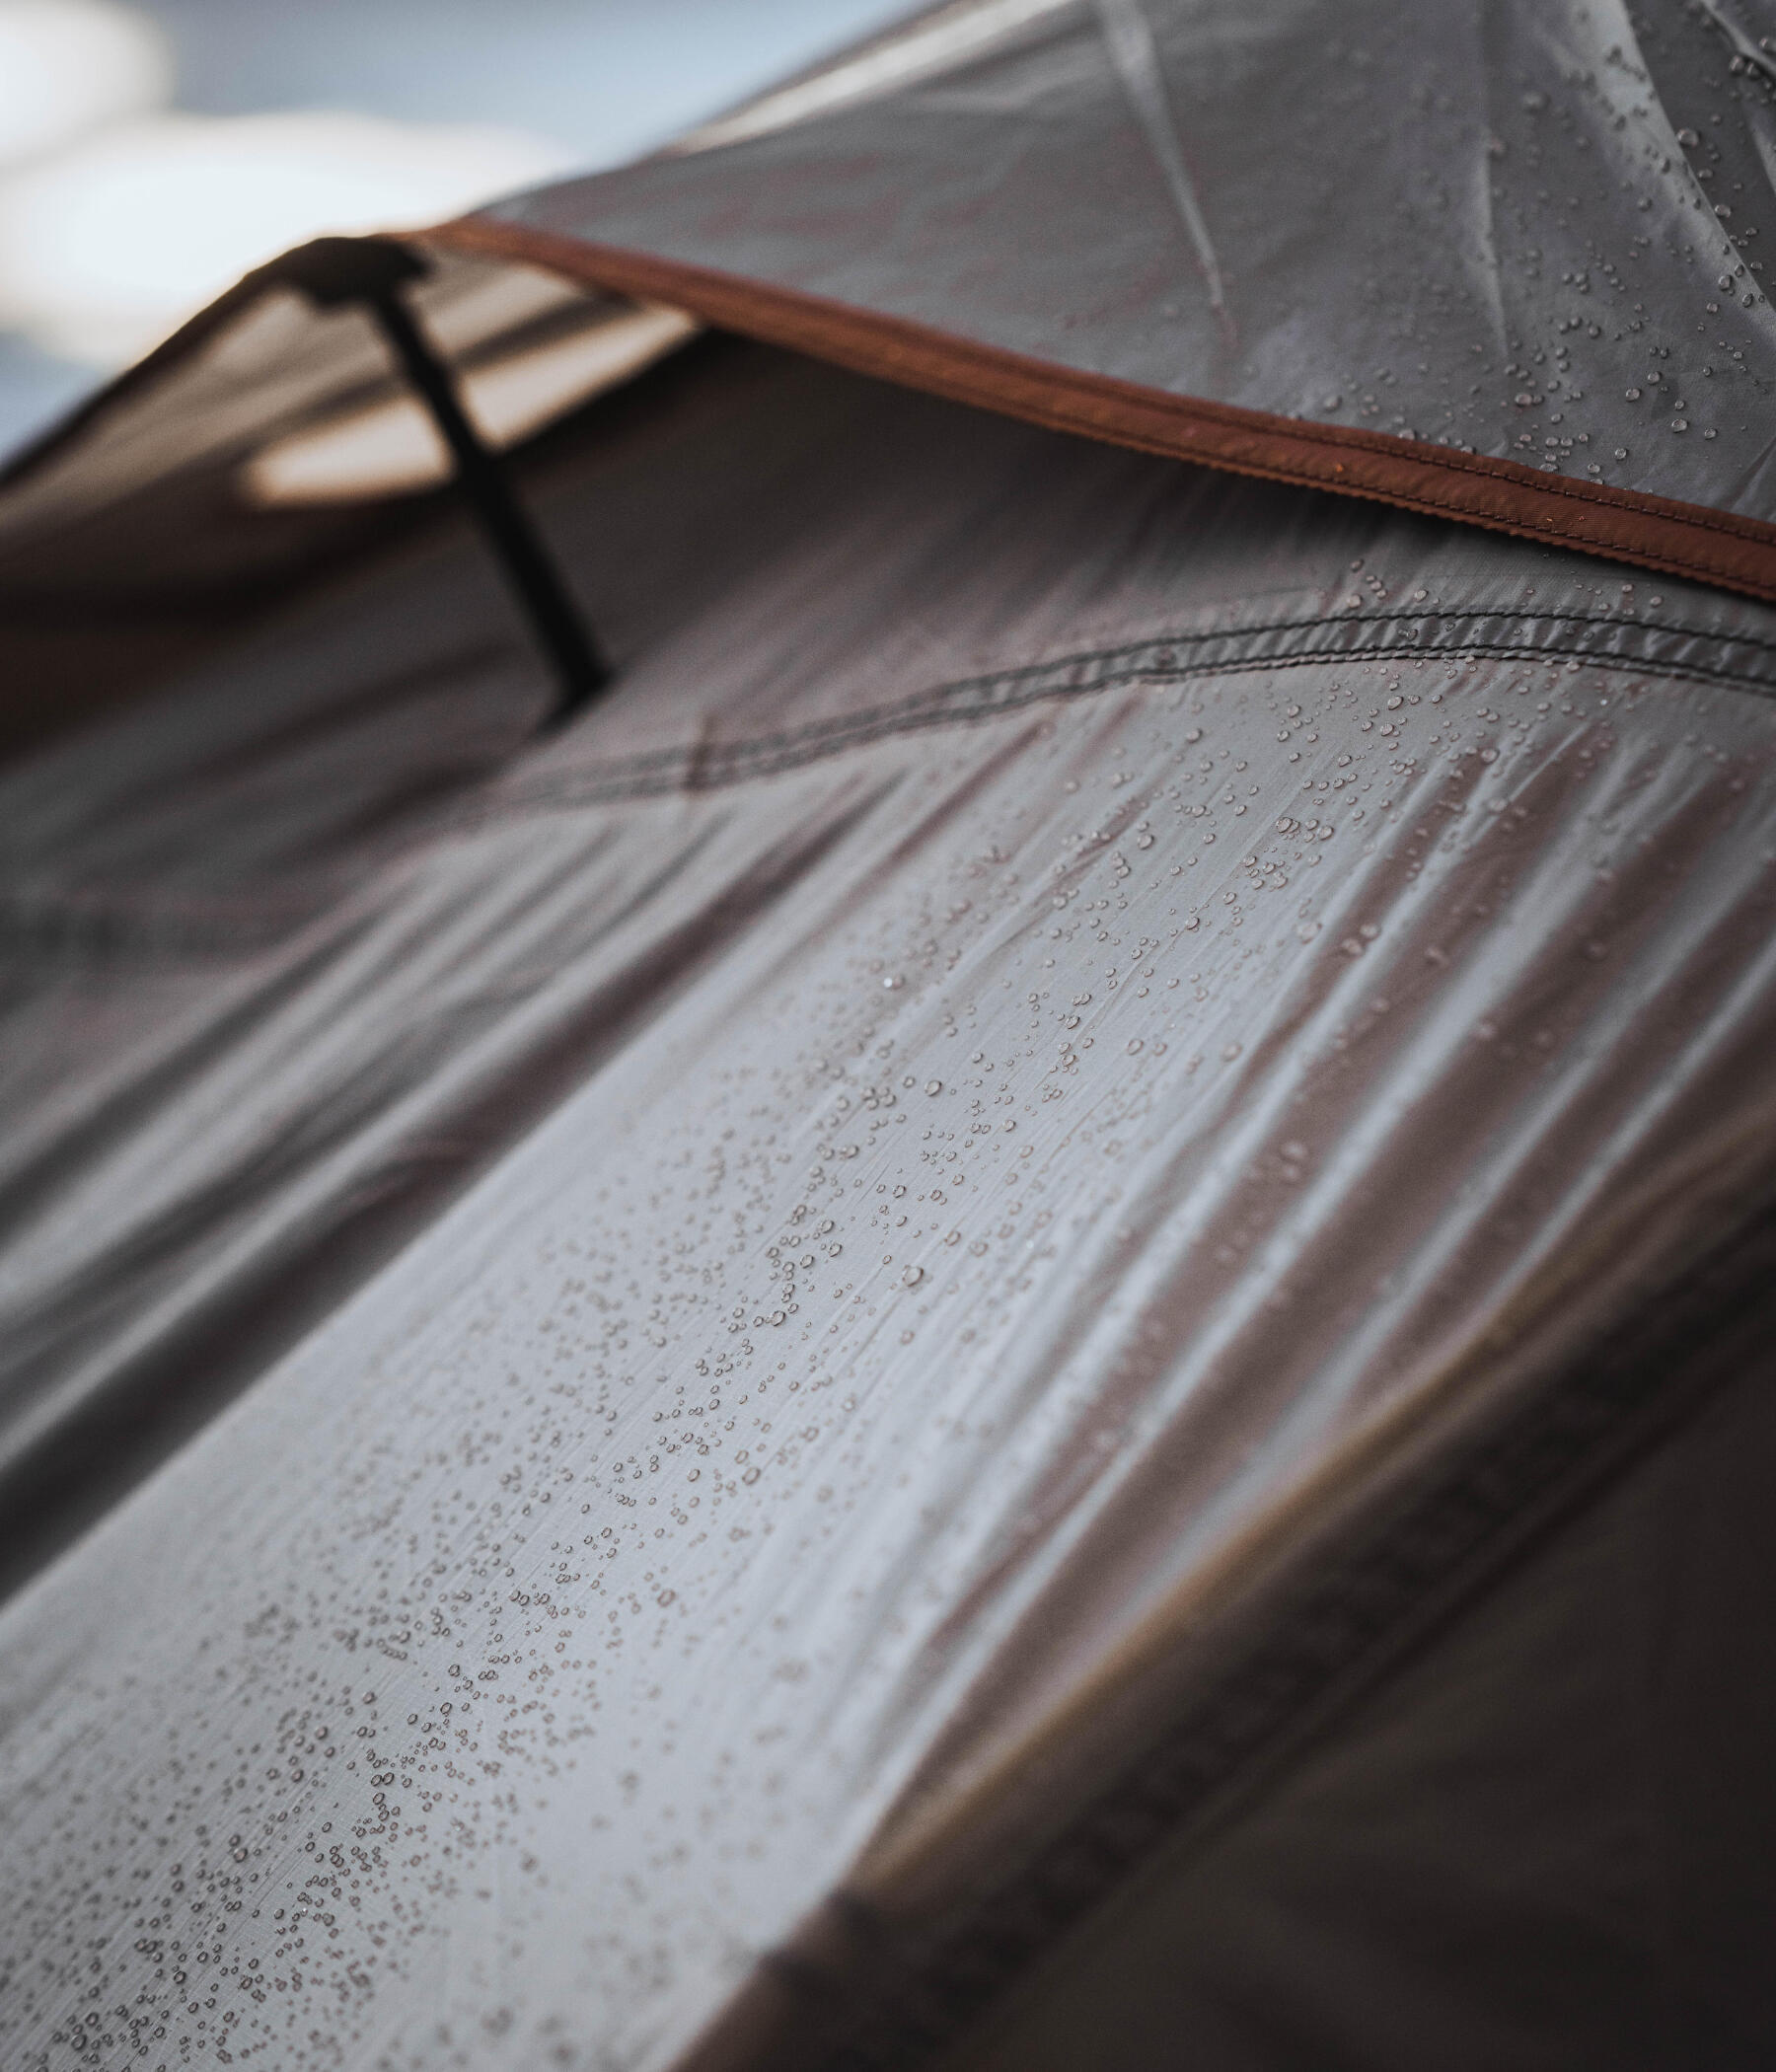 Camping in the rain: tips for getting kitted out and having fun